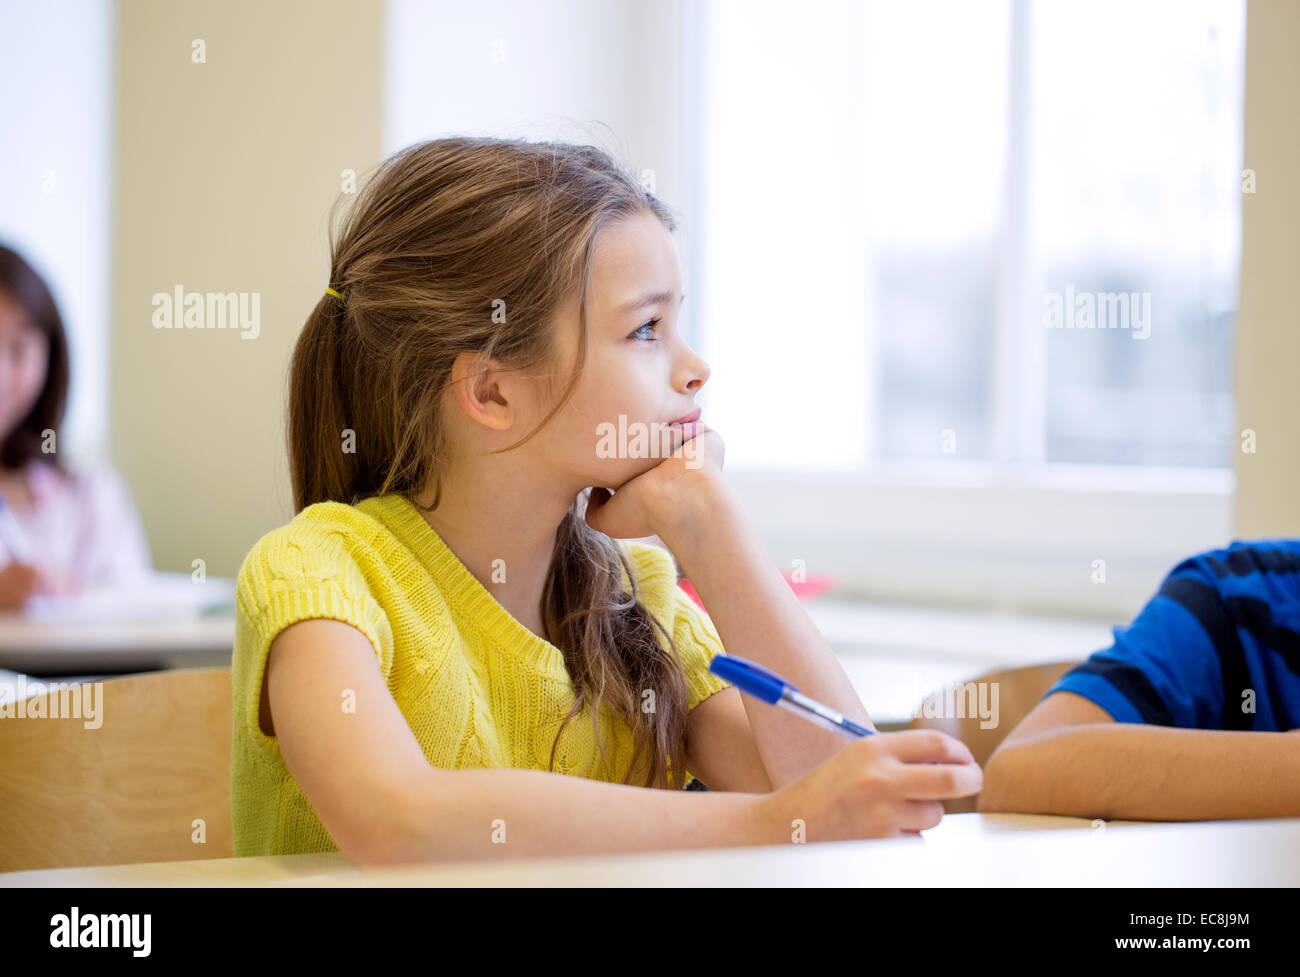 school girl with pen being bored in classroom Stock Photo